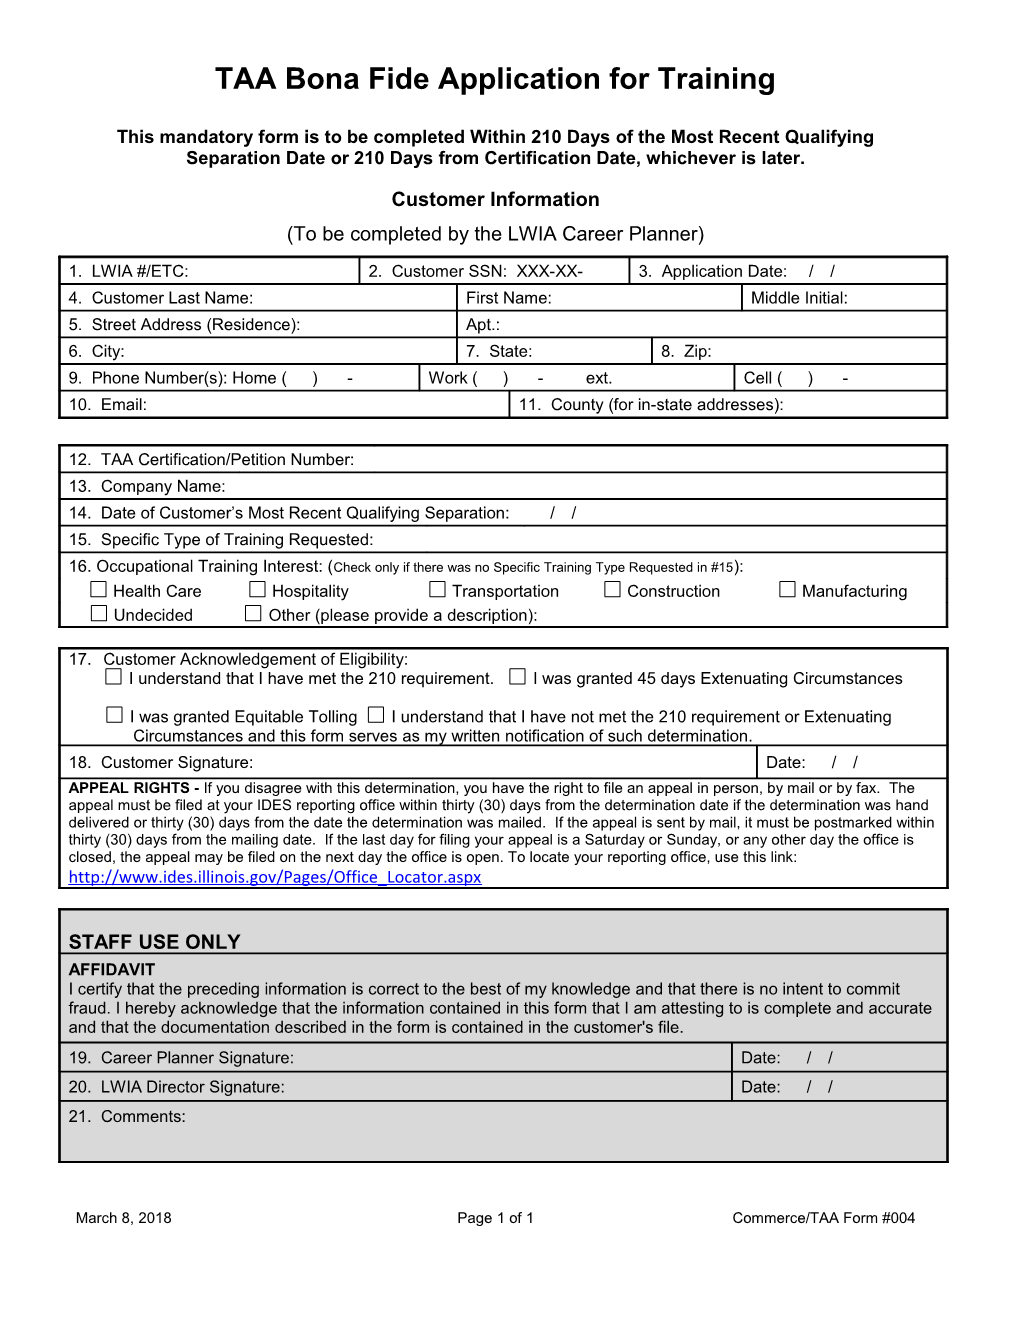 Form #004 - TAA Bona Fide Application for Training (MS Word)